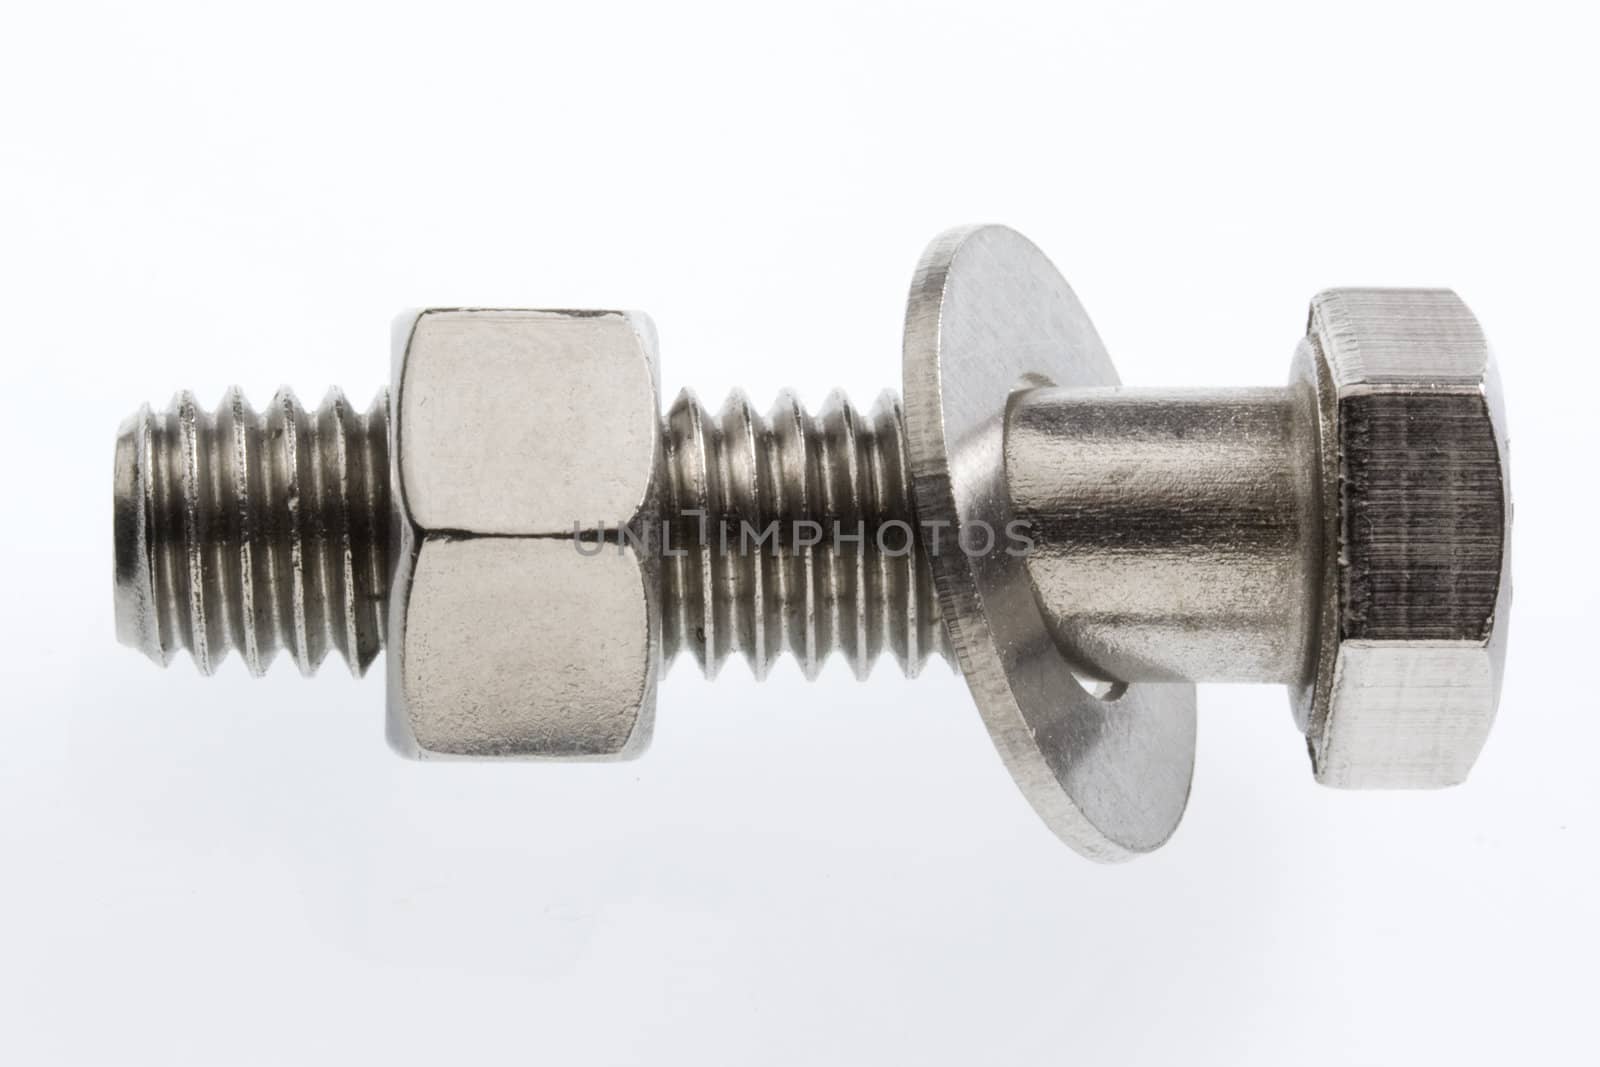 macro of a big stainless steel bolt with a nut and washer on white